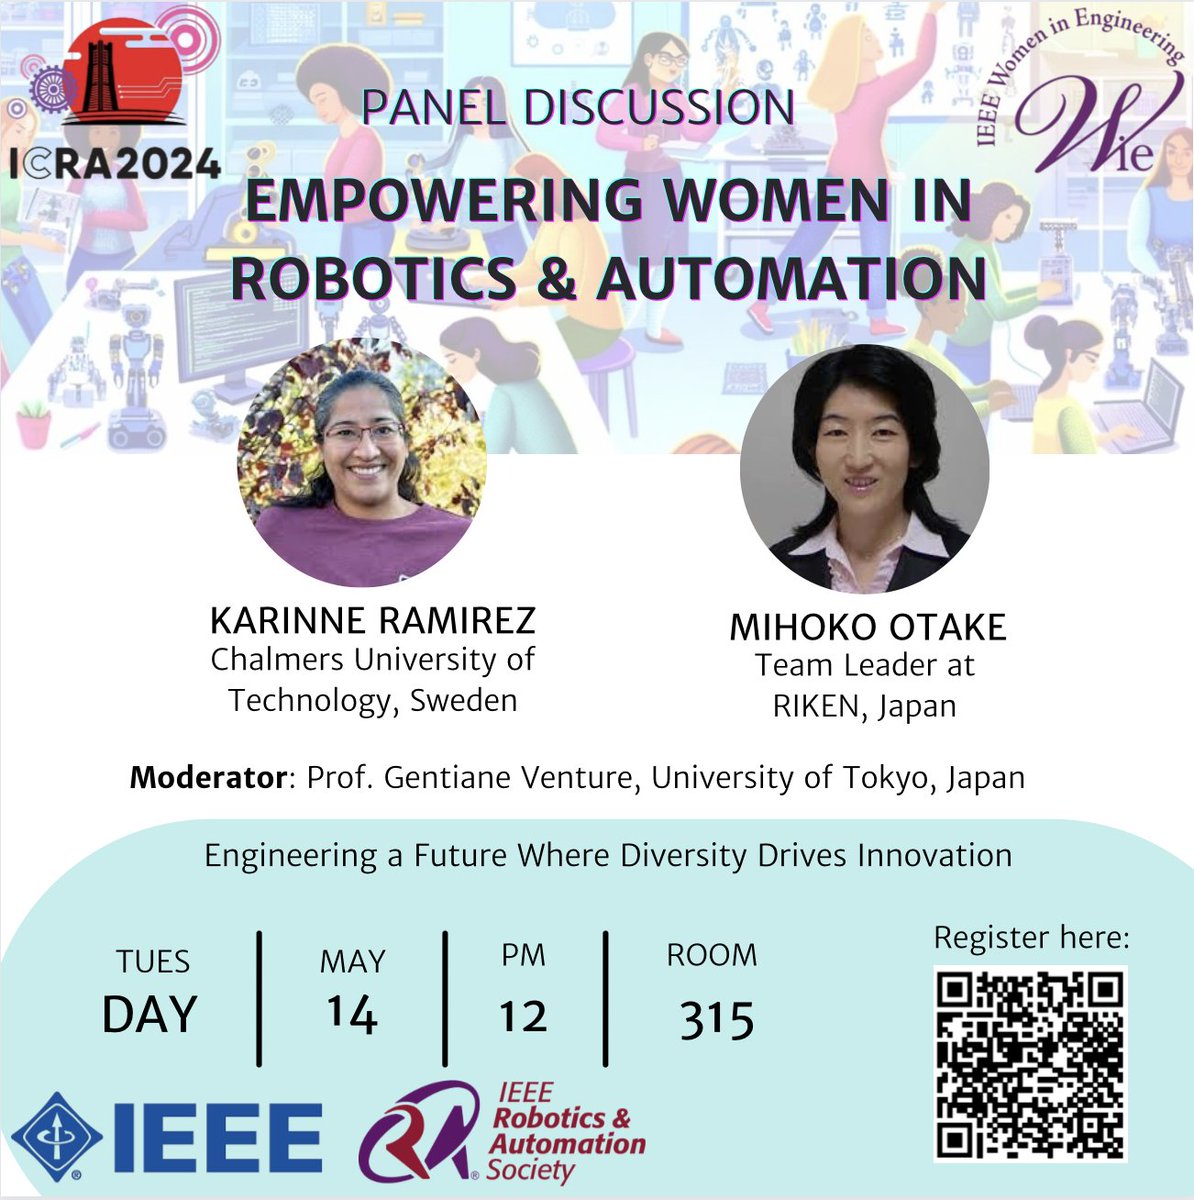 Are you joining @ieee_ras_icra #ICRA2024? Join us for the #WomenInEngineering panel discussion on 'Empowering Women in #Robotics & #Automation' with @KarinneRamirezA and @MihokoOtake on Tue 14 May 12pm. #Lunch is provided! Register now: docs.google.com/forms/d/e/1FAI… @GeorgiaChal